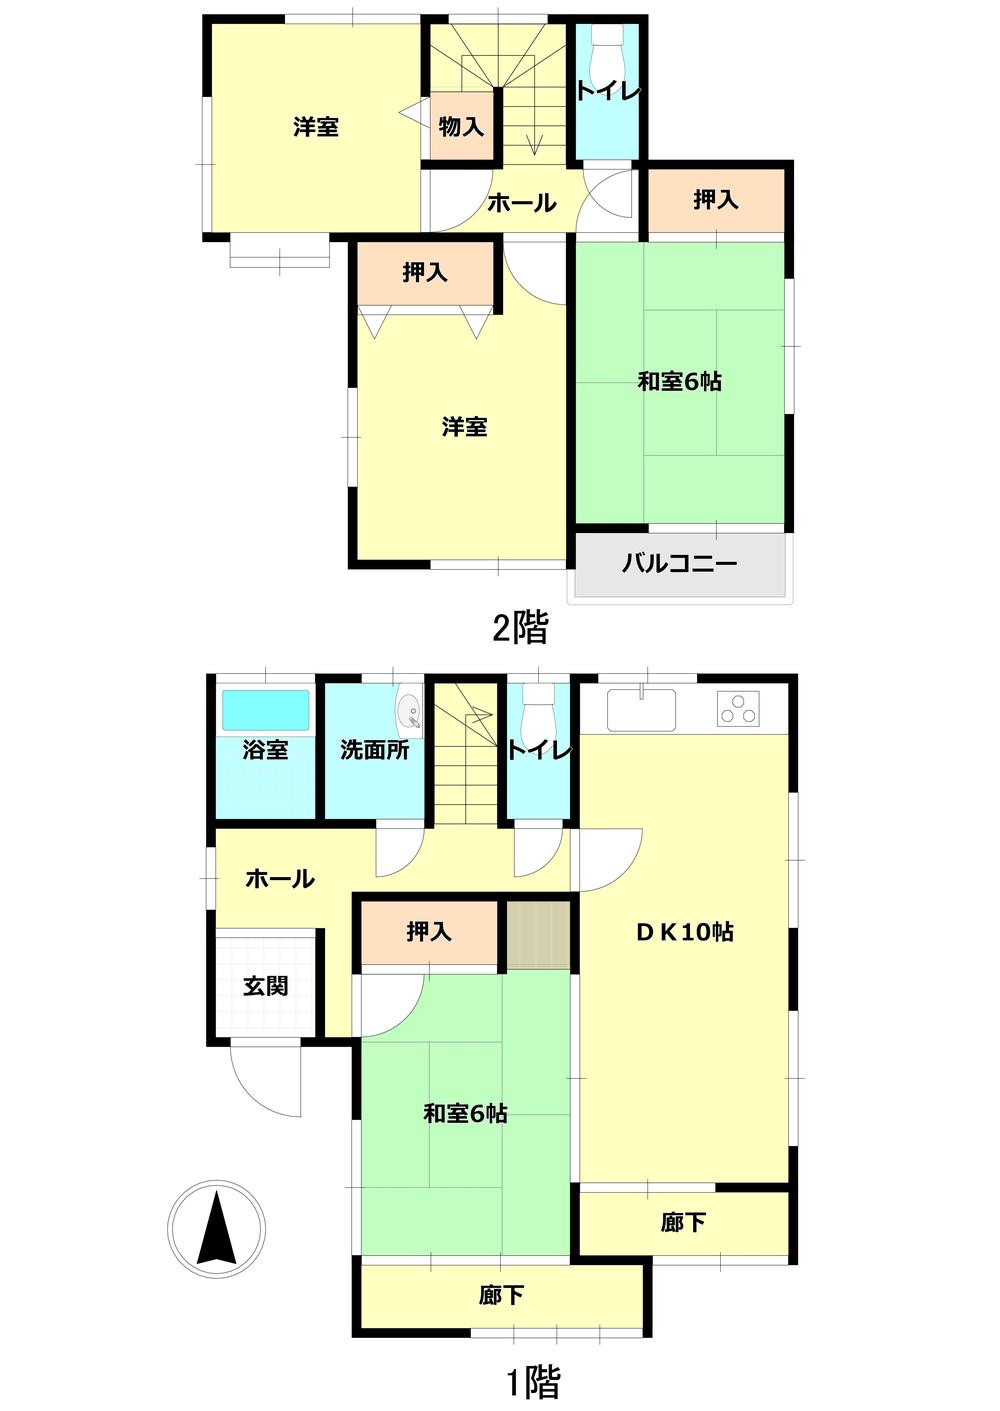 Floor plan. 7.8 million yen, 4LDK, Land area 132.23 sq m , We will give priority to the building area 89.01 sq m Current Status. 